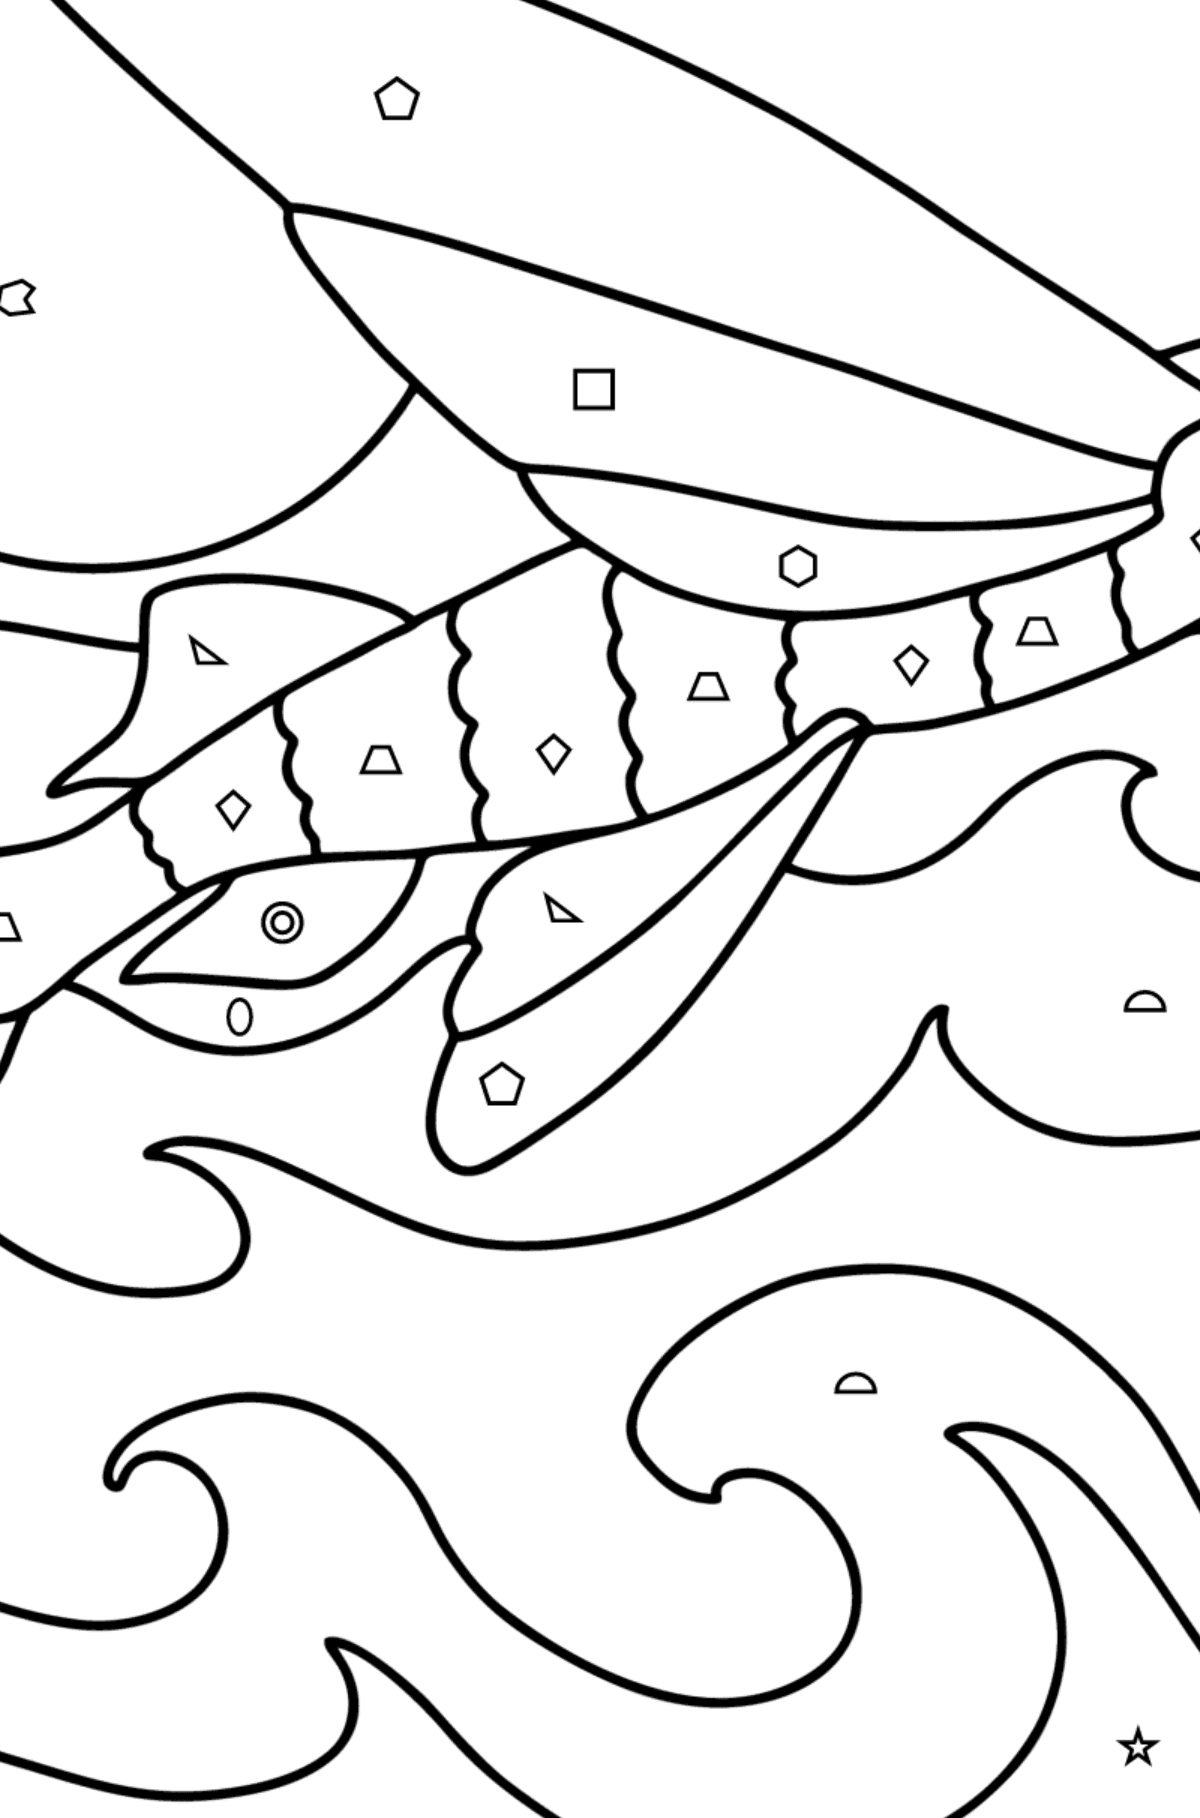 Flying fish coloring page - Coloring by Geometric Shapes for Kids